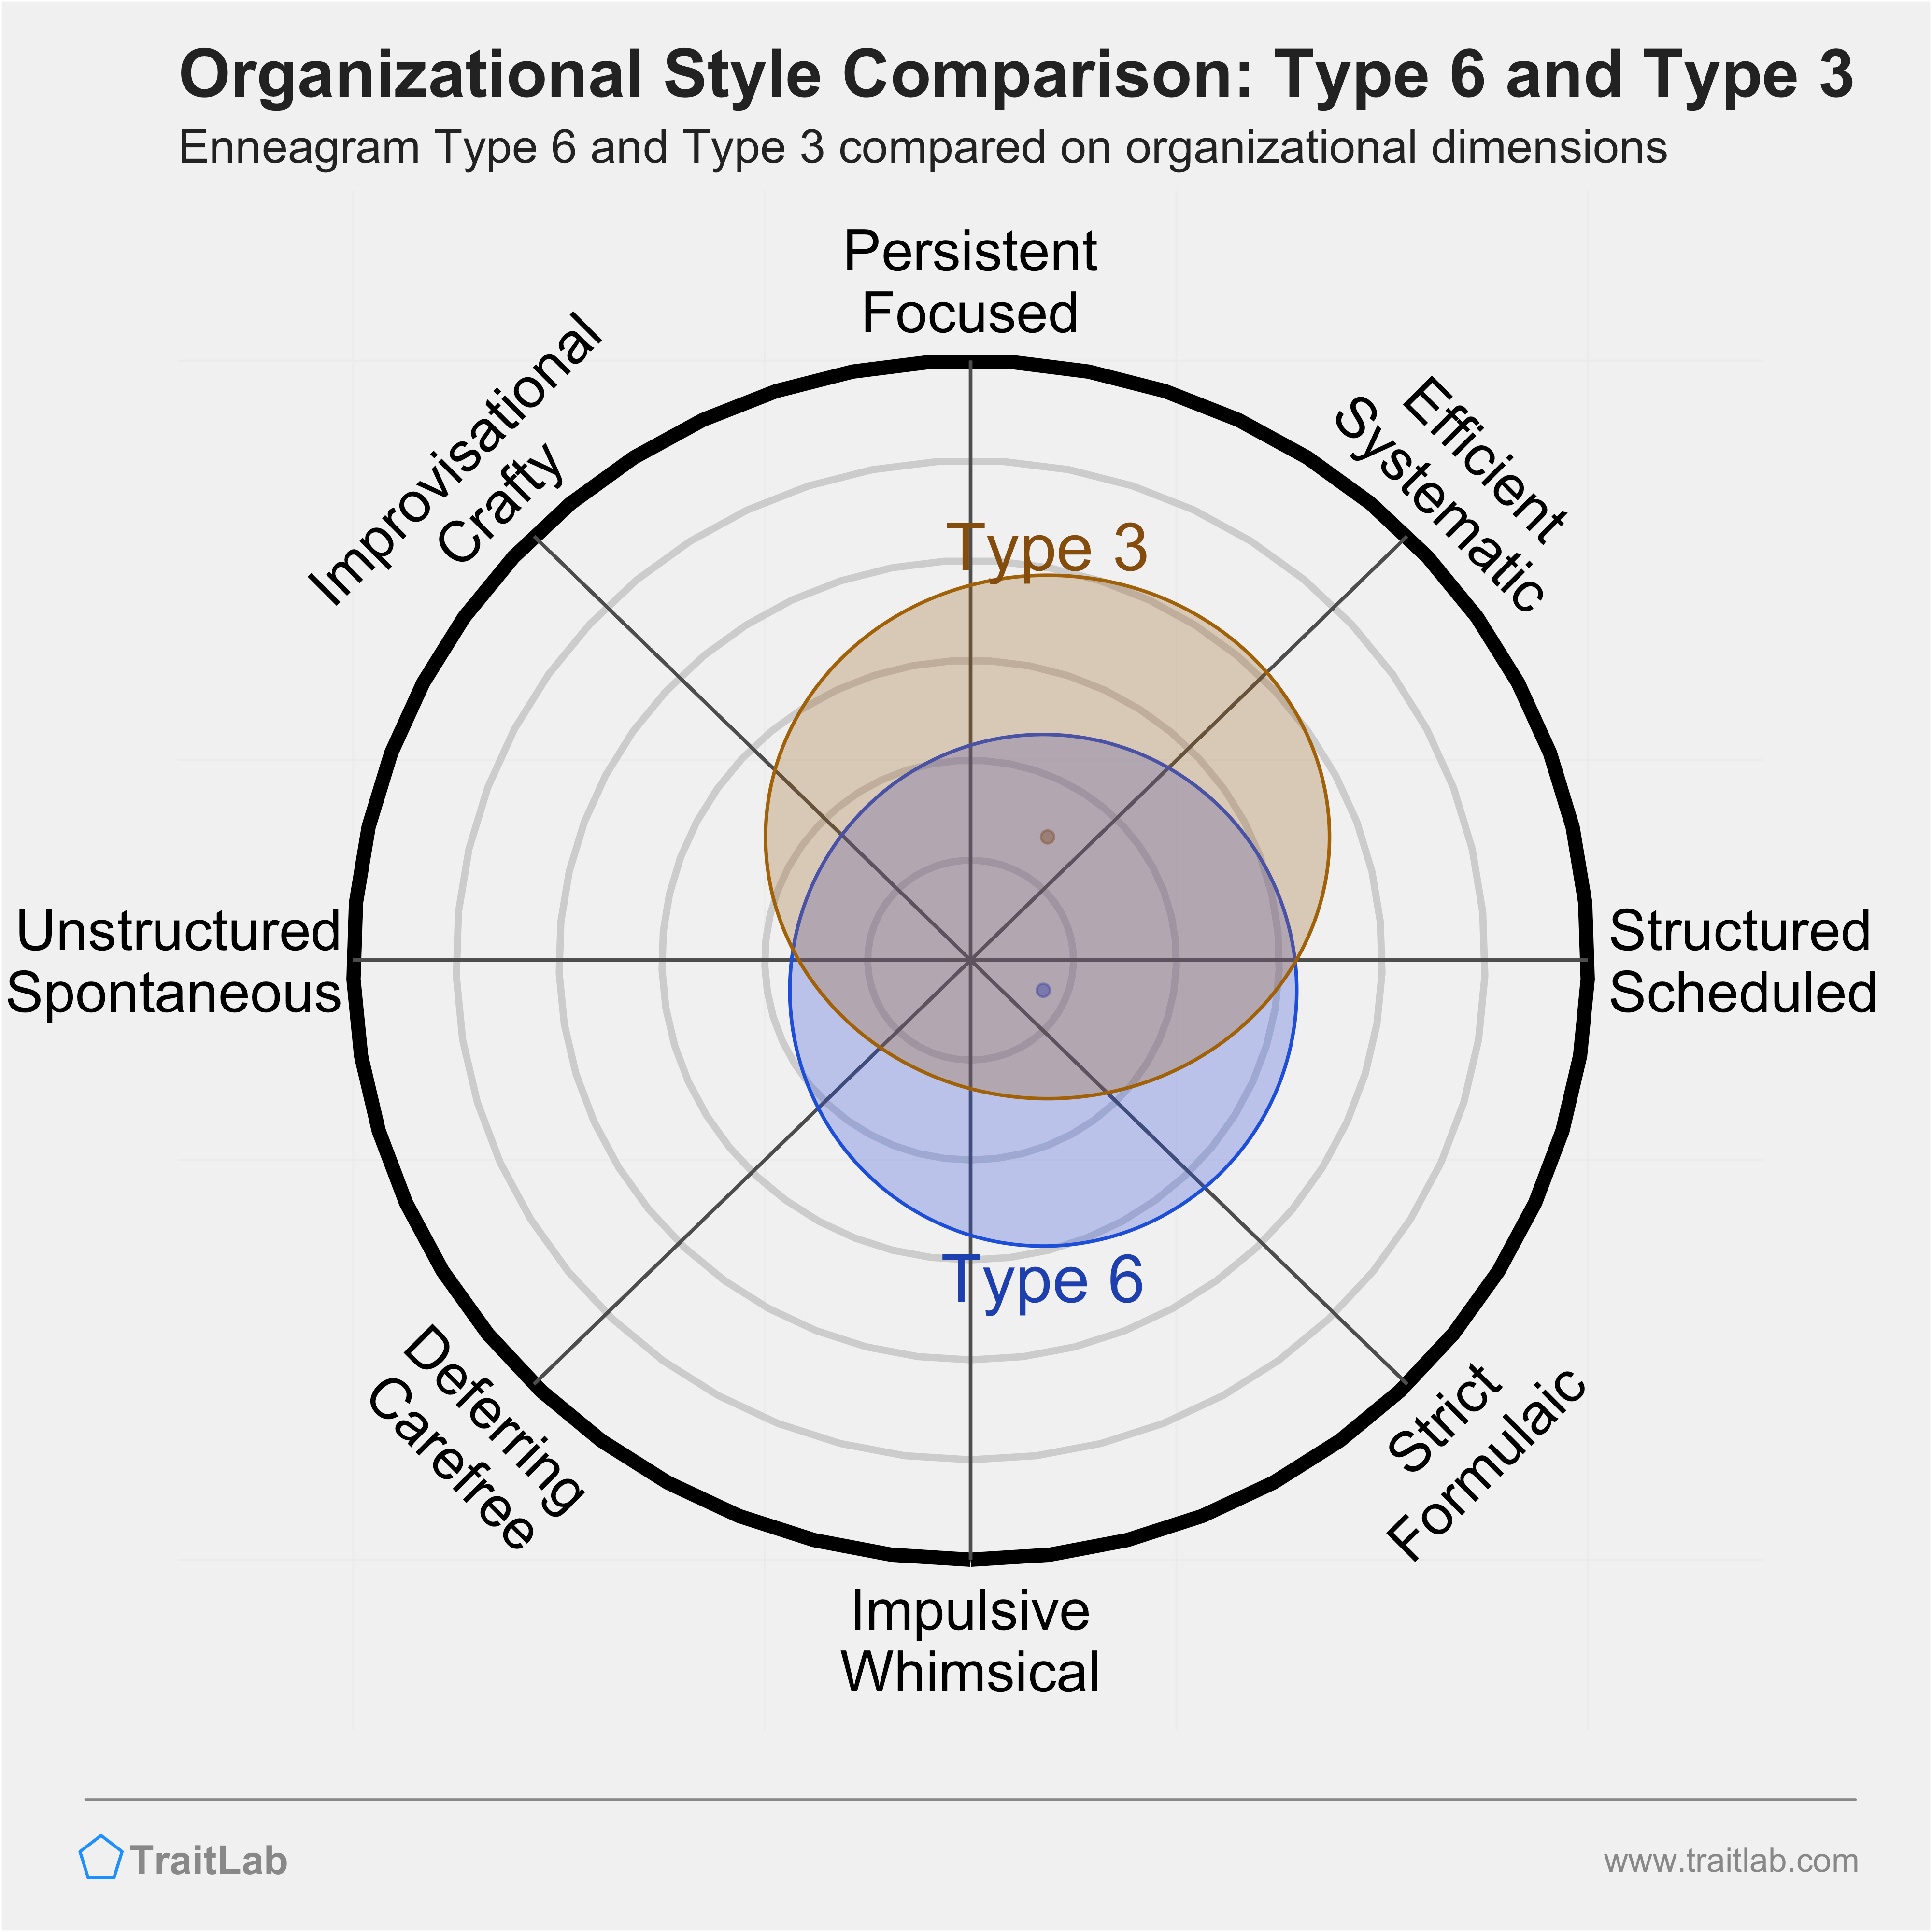 Type 6 and Type 3 comparison across organizational dimensions